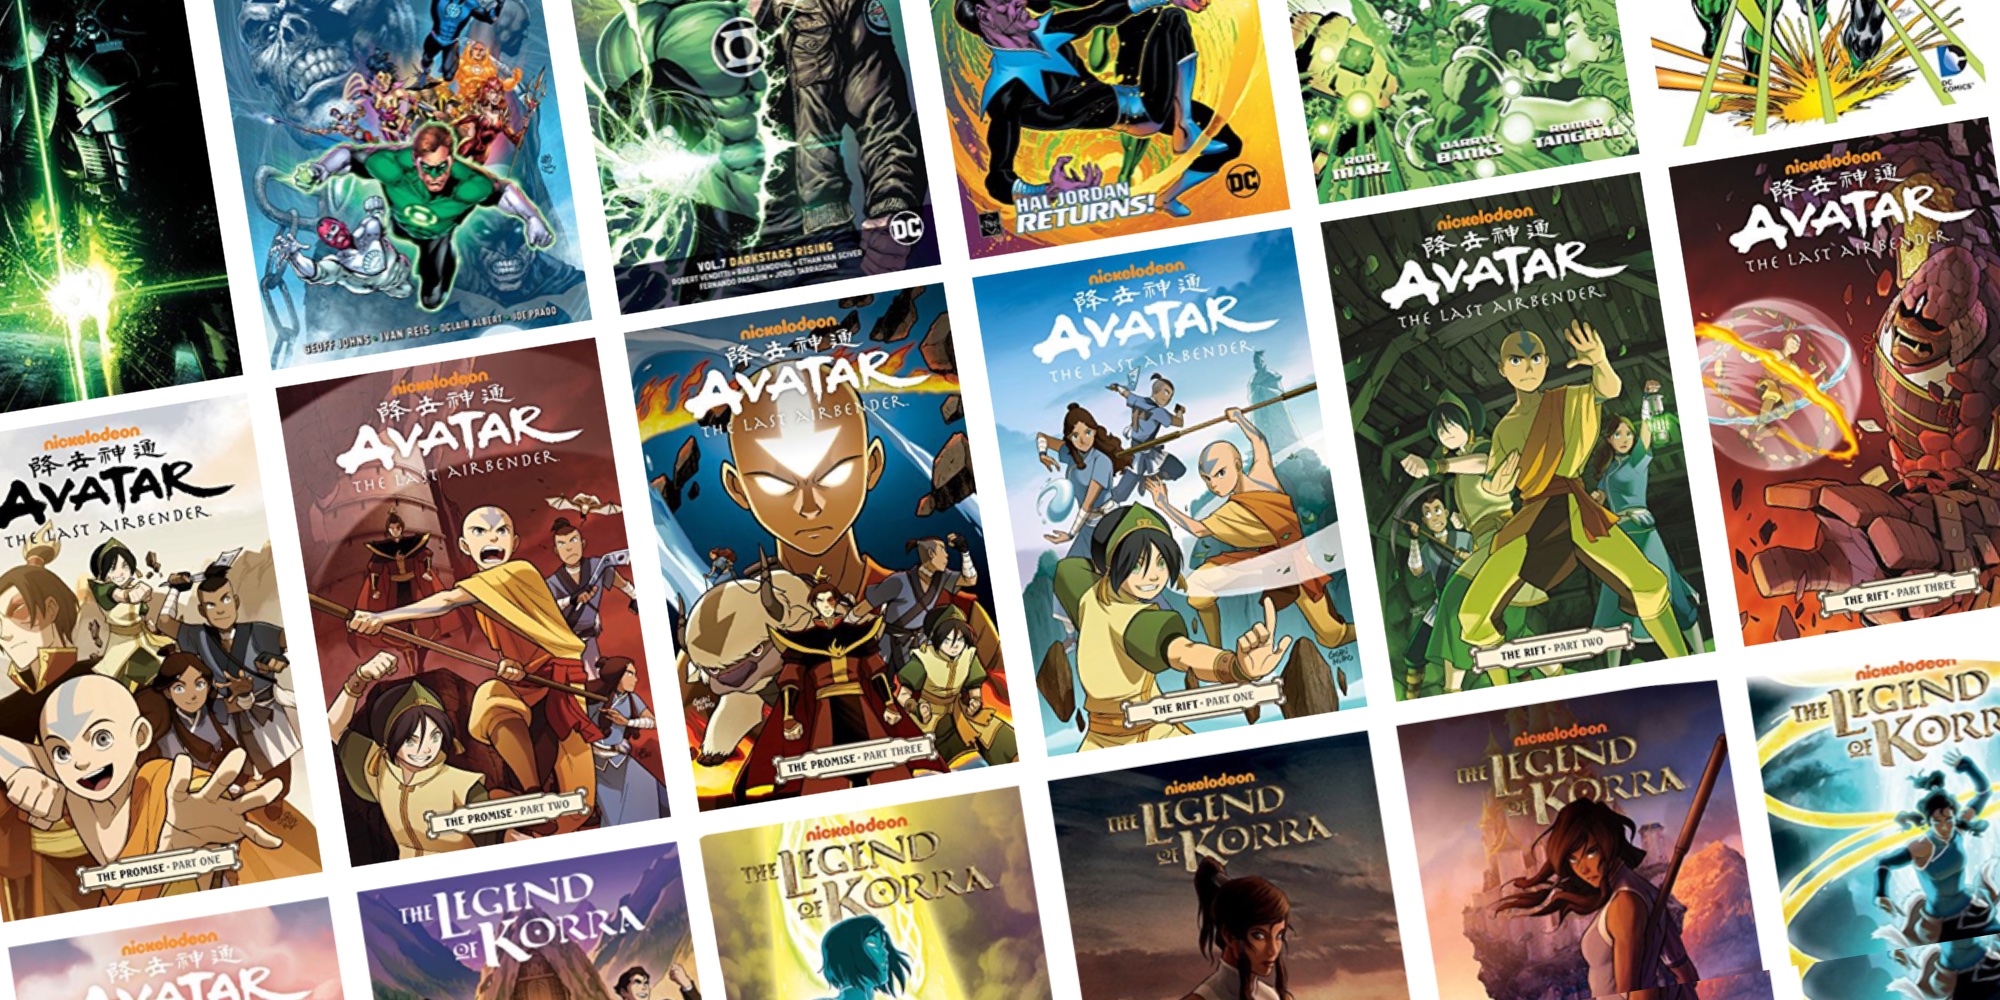 23 Books to Read After Your Avatar The Last Airbender Binge